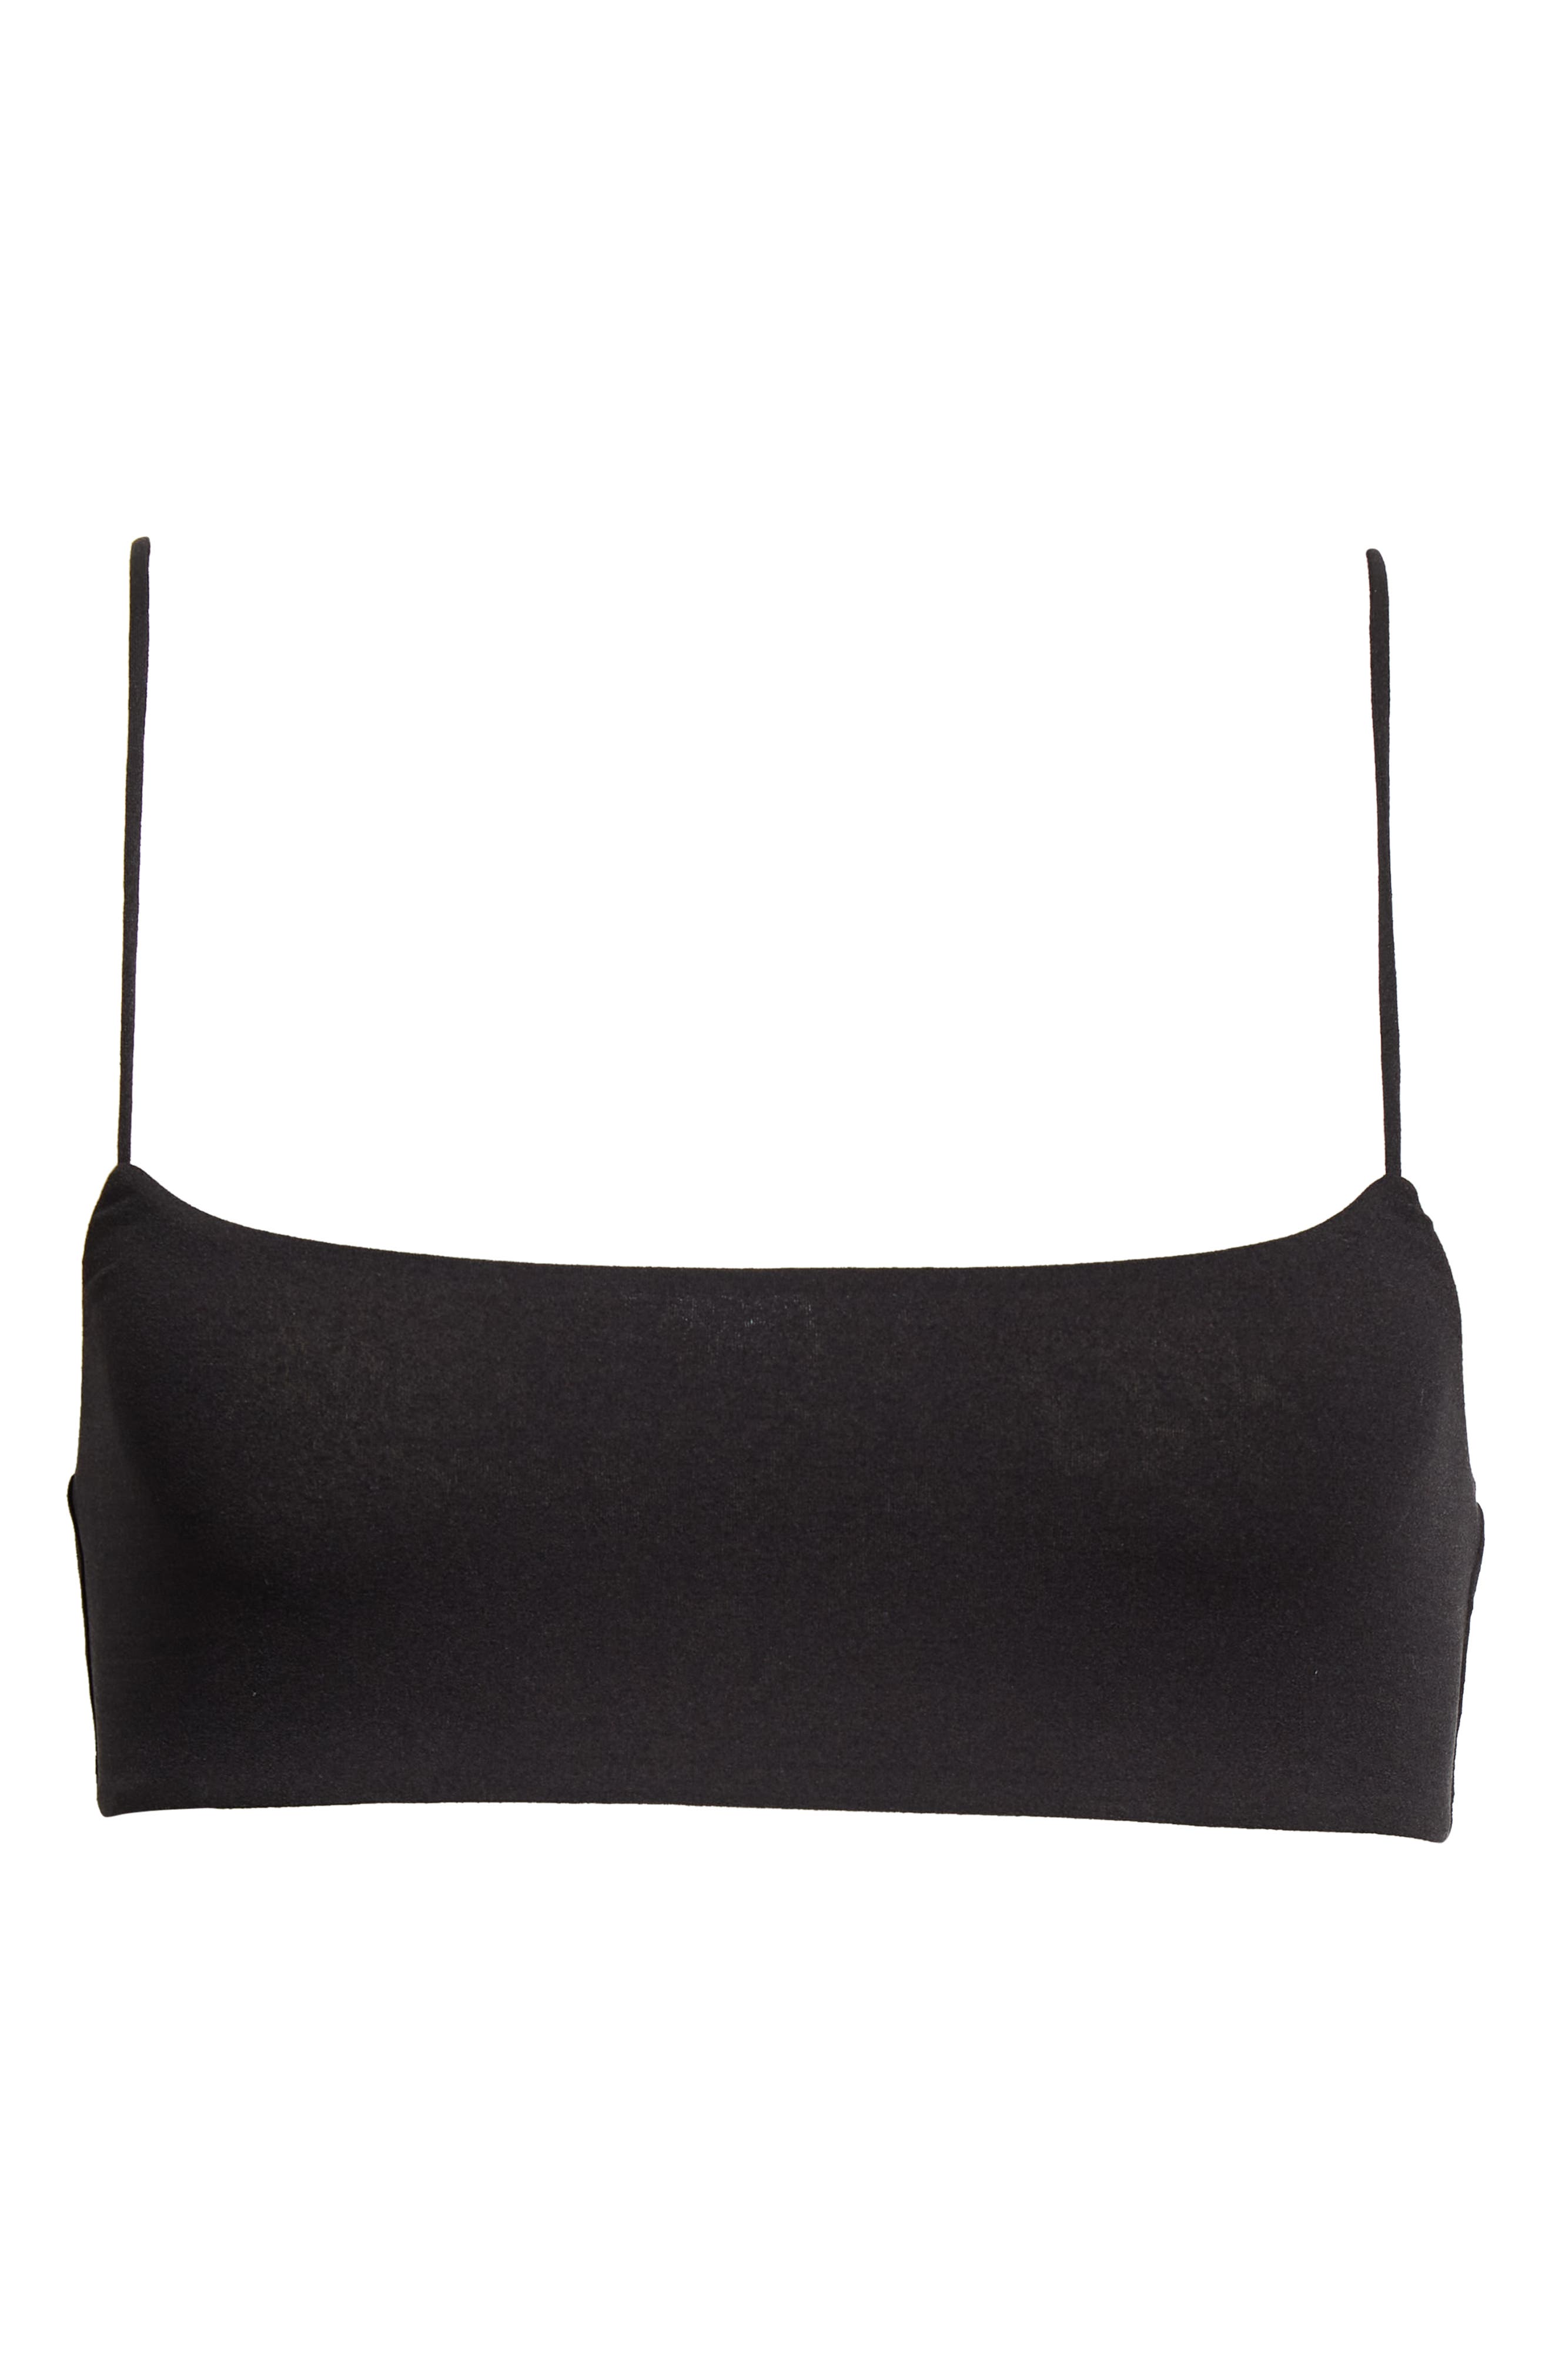 The Row Flori Stretch Silk Bra in Black at Nordstrom, Size Small